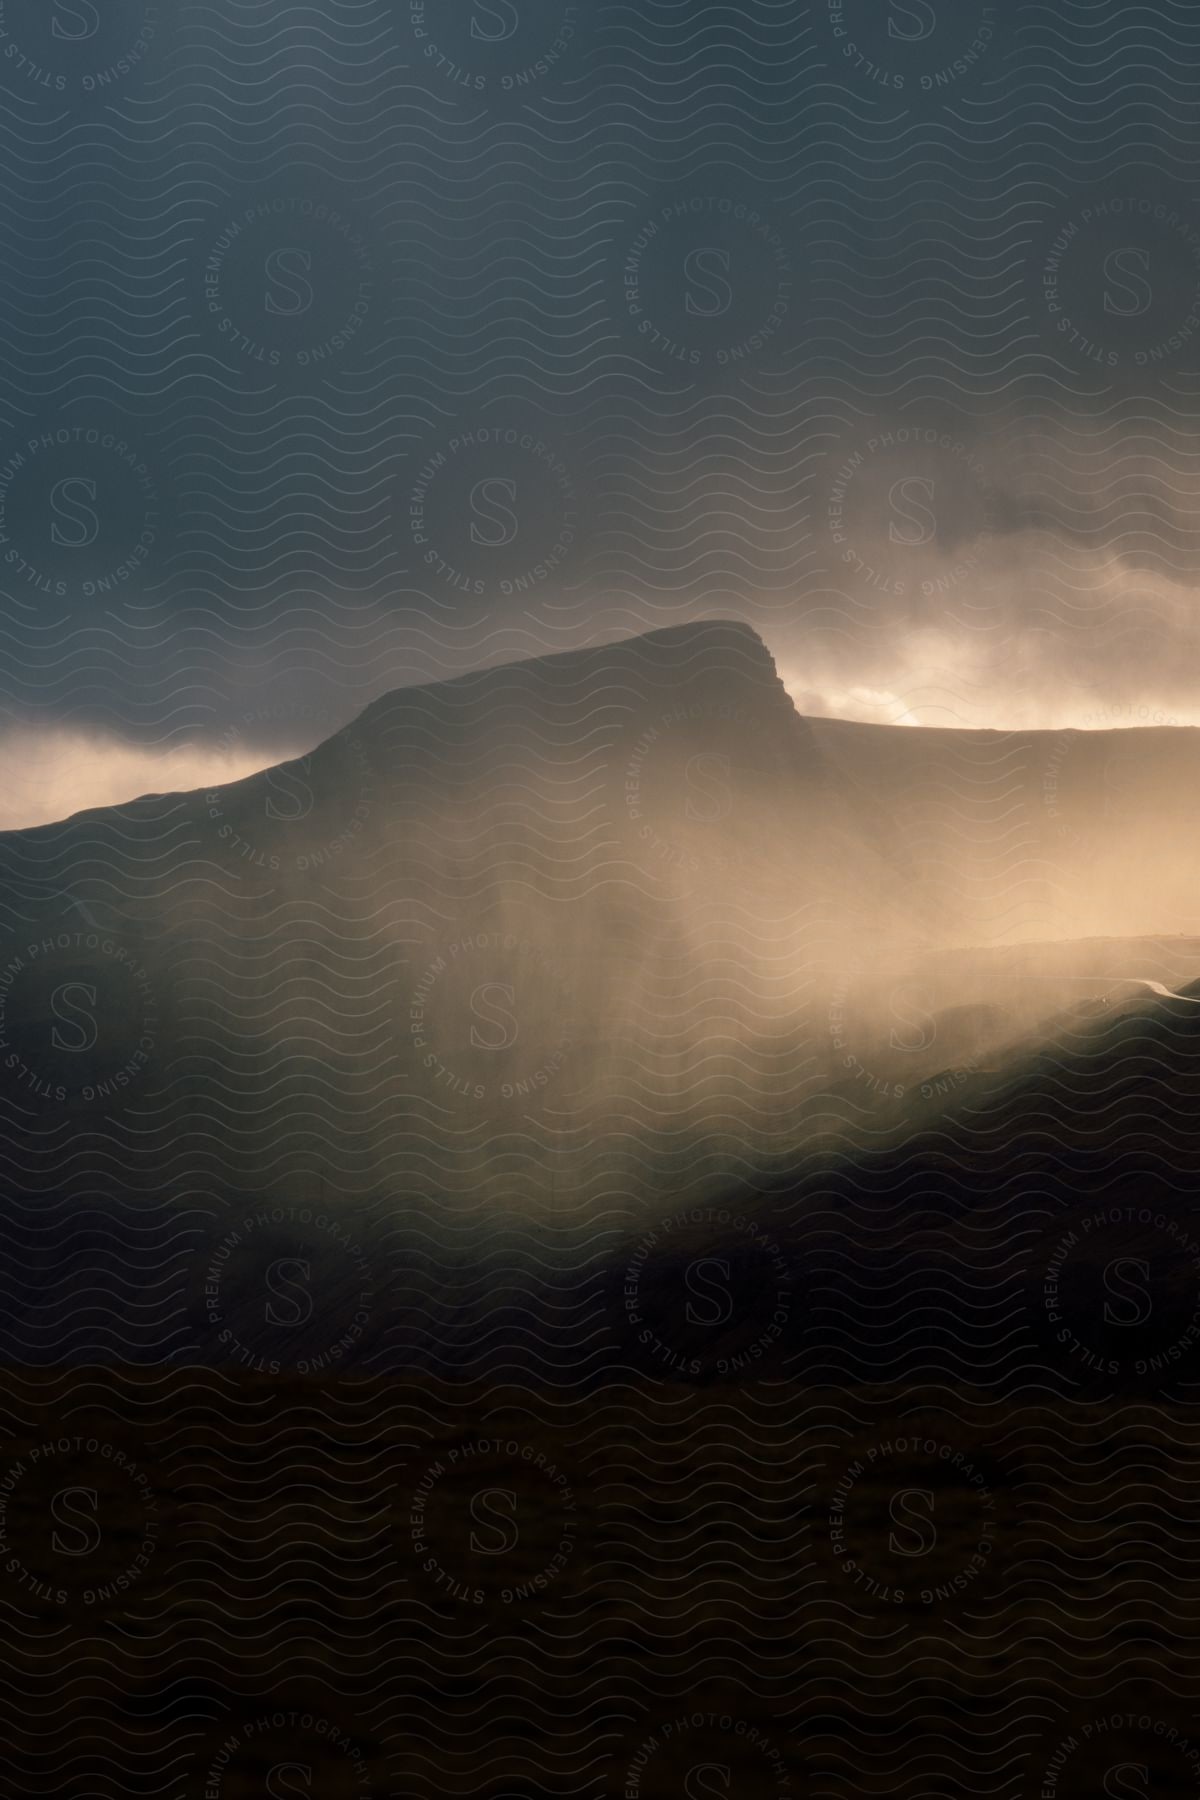 A mountain is visible through a hazy atmosphere at dawn